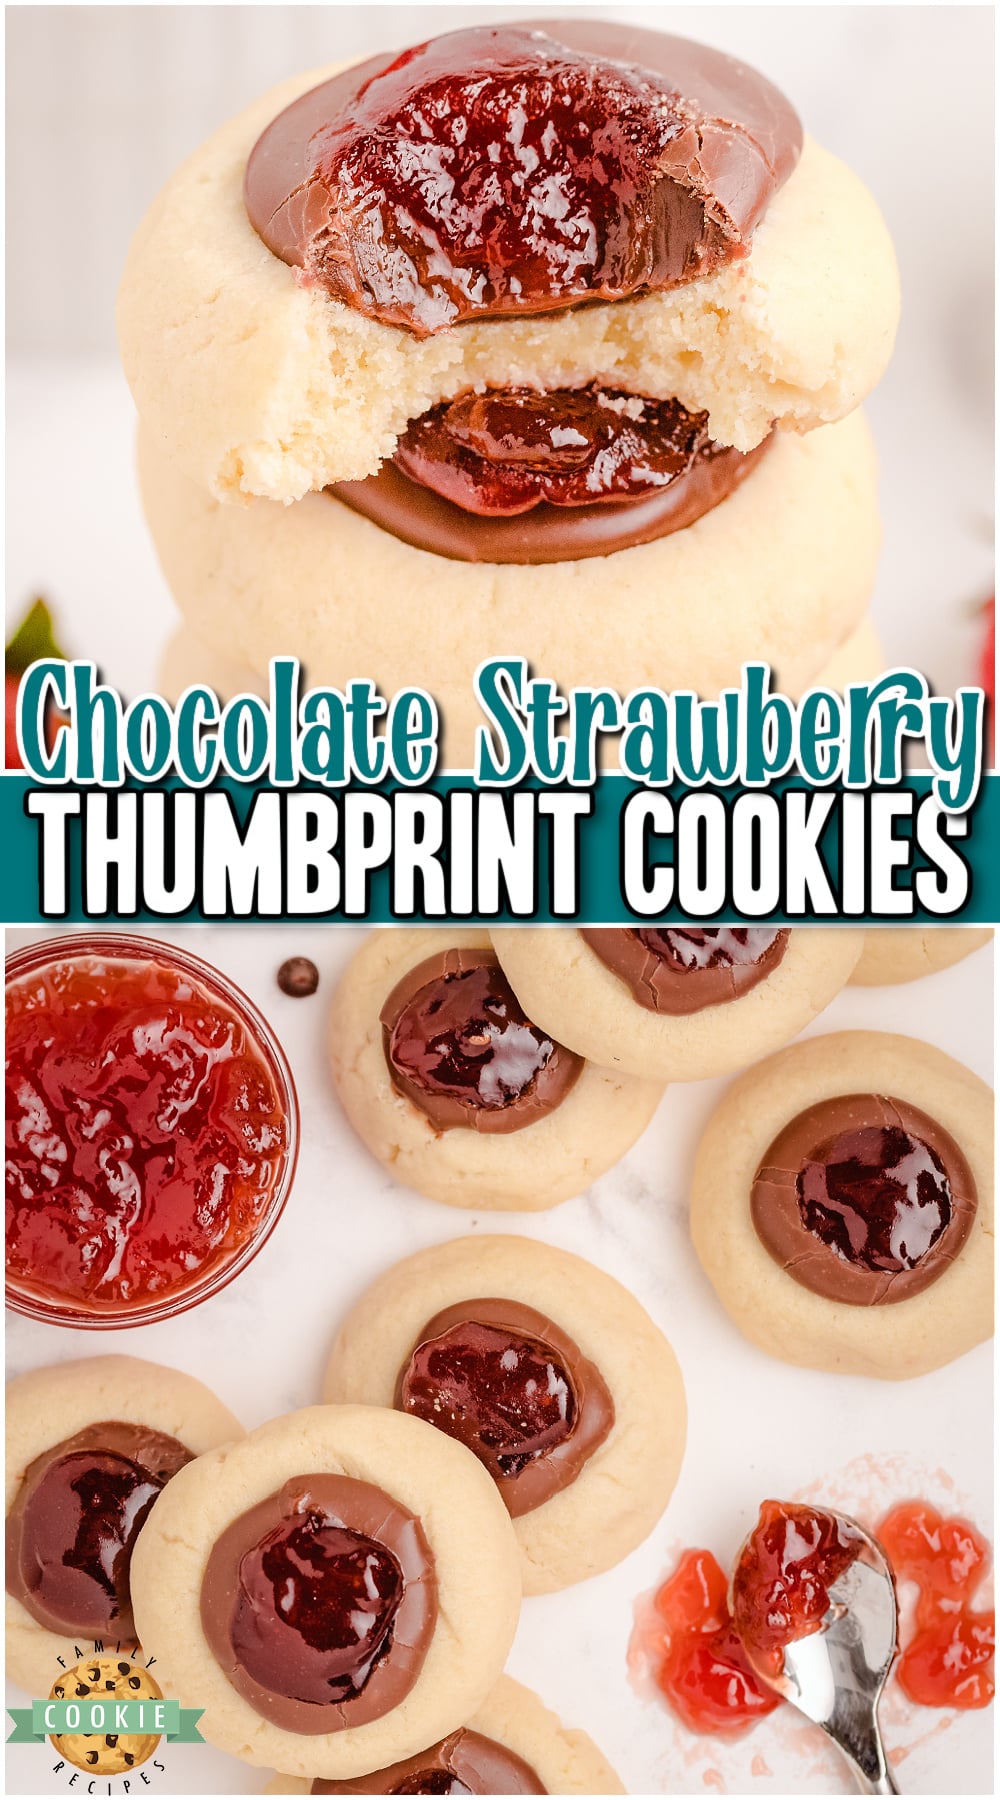 Chocolate Raspberry Thumbprint Cookies are buttery soft cookies, topped with chocolate fudge & raspberry jam! Our Raspberry Thumbprint cookie recipe has a layer of decadent chocolate!